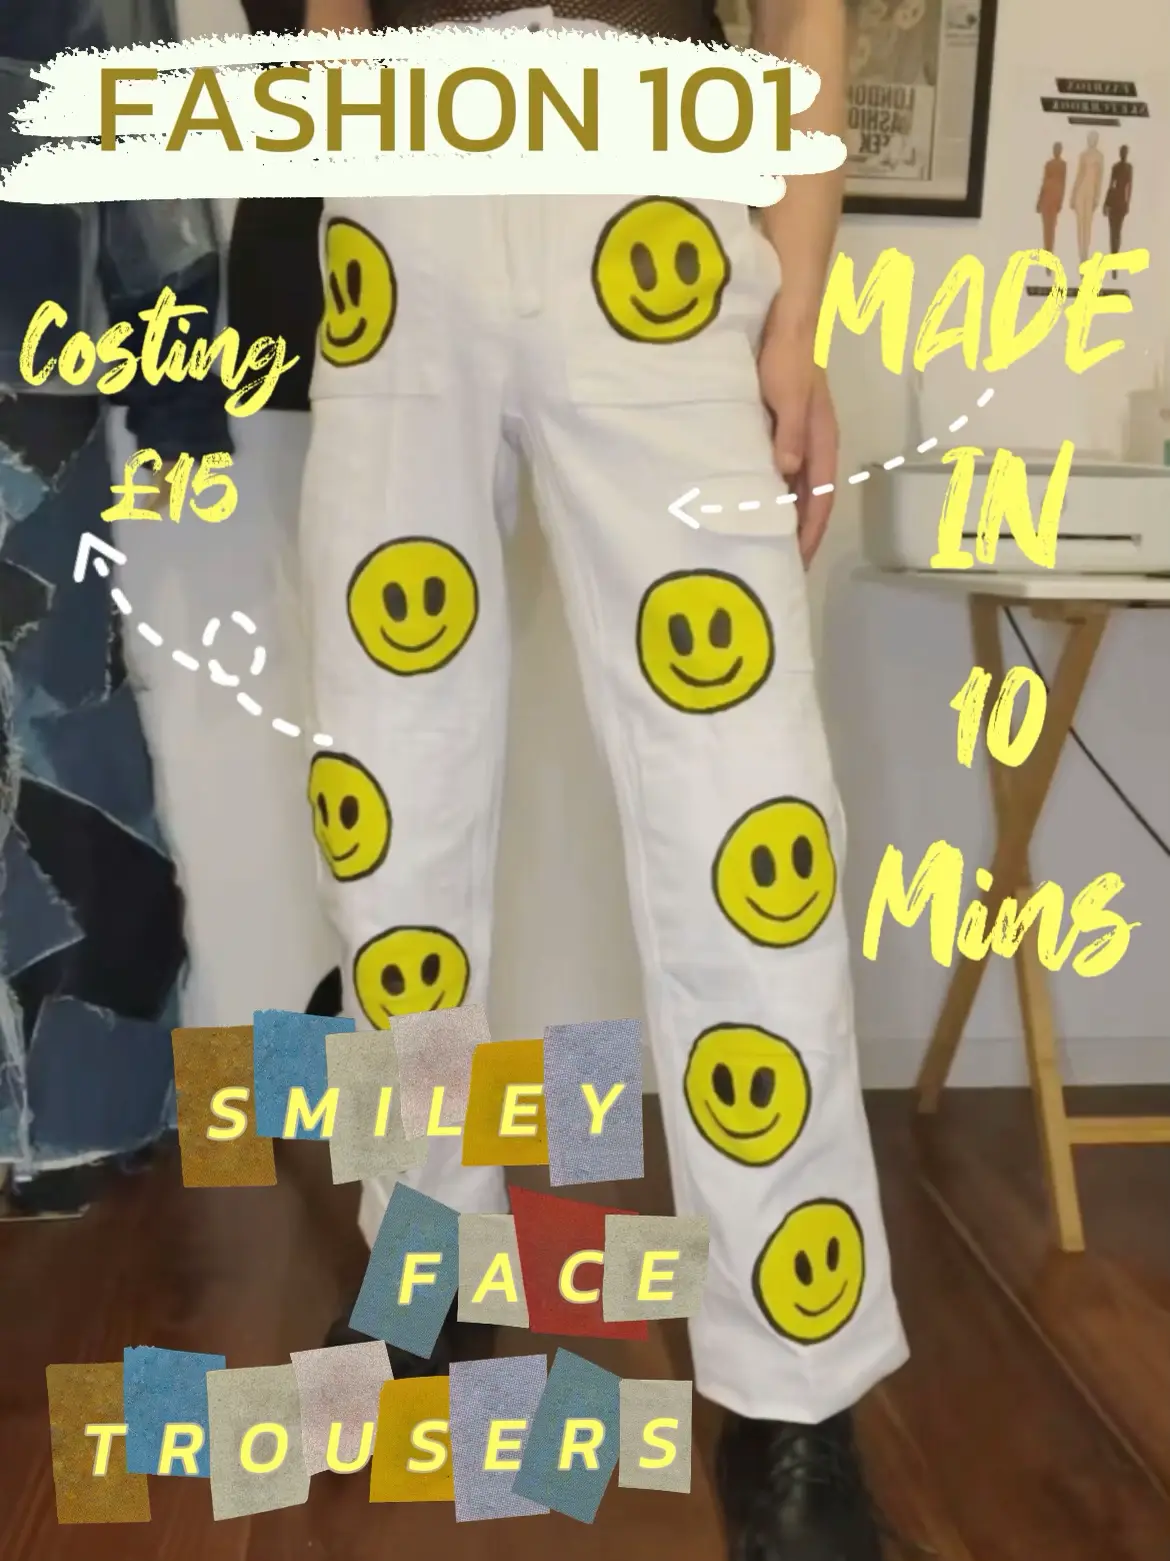 DIY SMILEY FACE TROUSERS- Made in 20 mins, Gallery posted by ajxtinsley